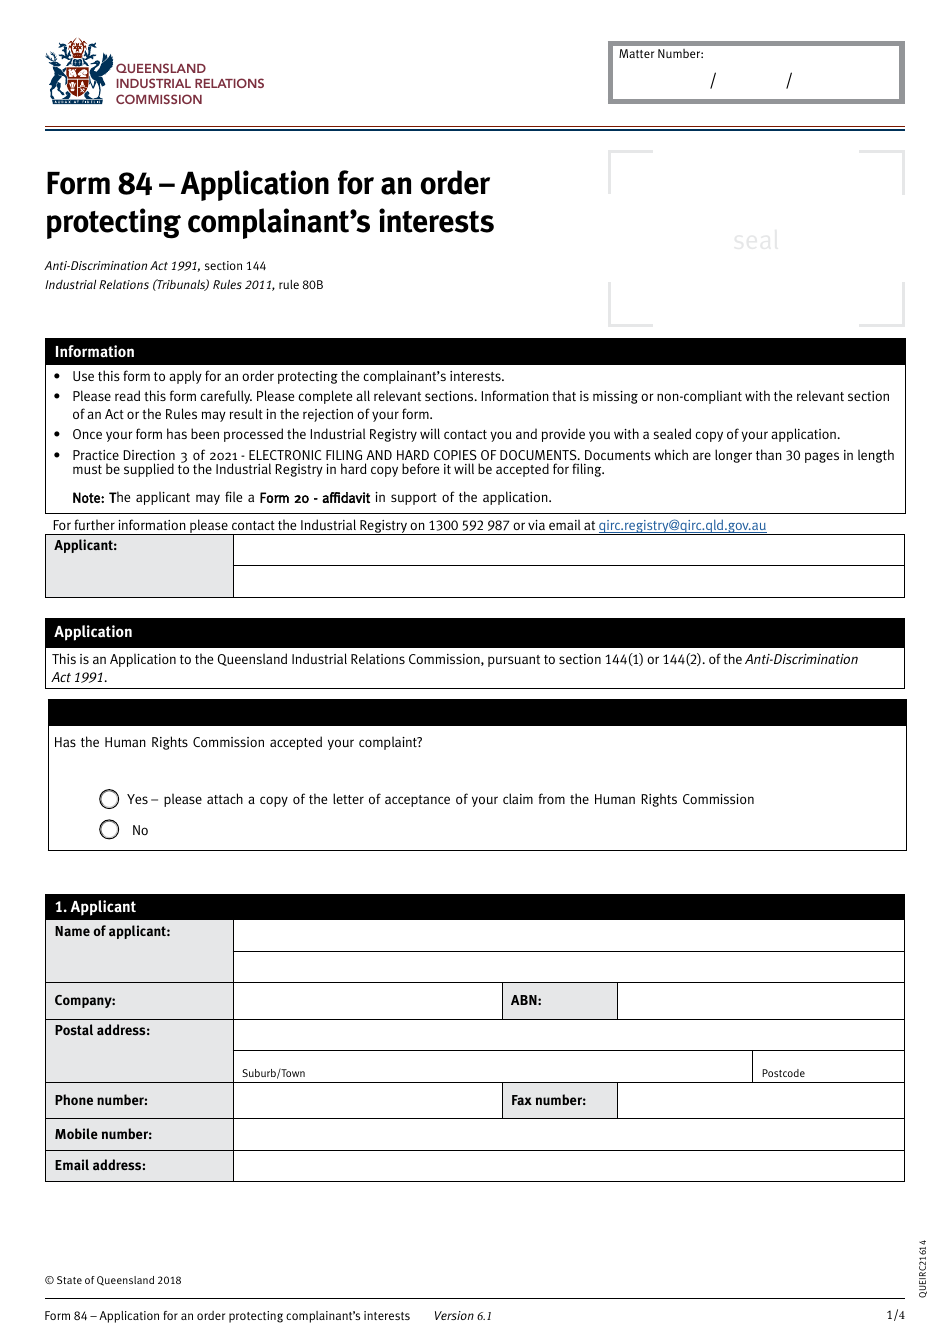 Form 84 Application for an Order Protecting Complainants Interests - Queensland, Australia, Page 1